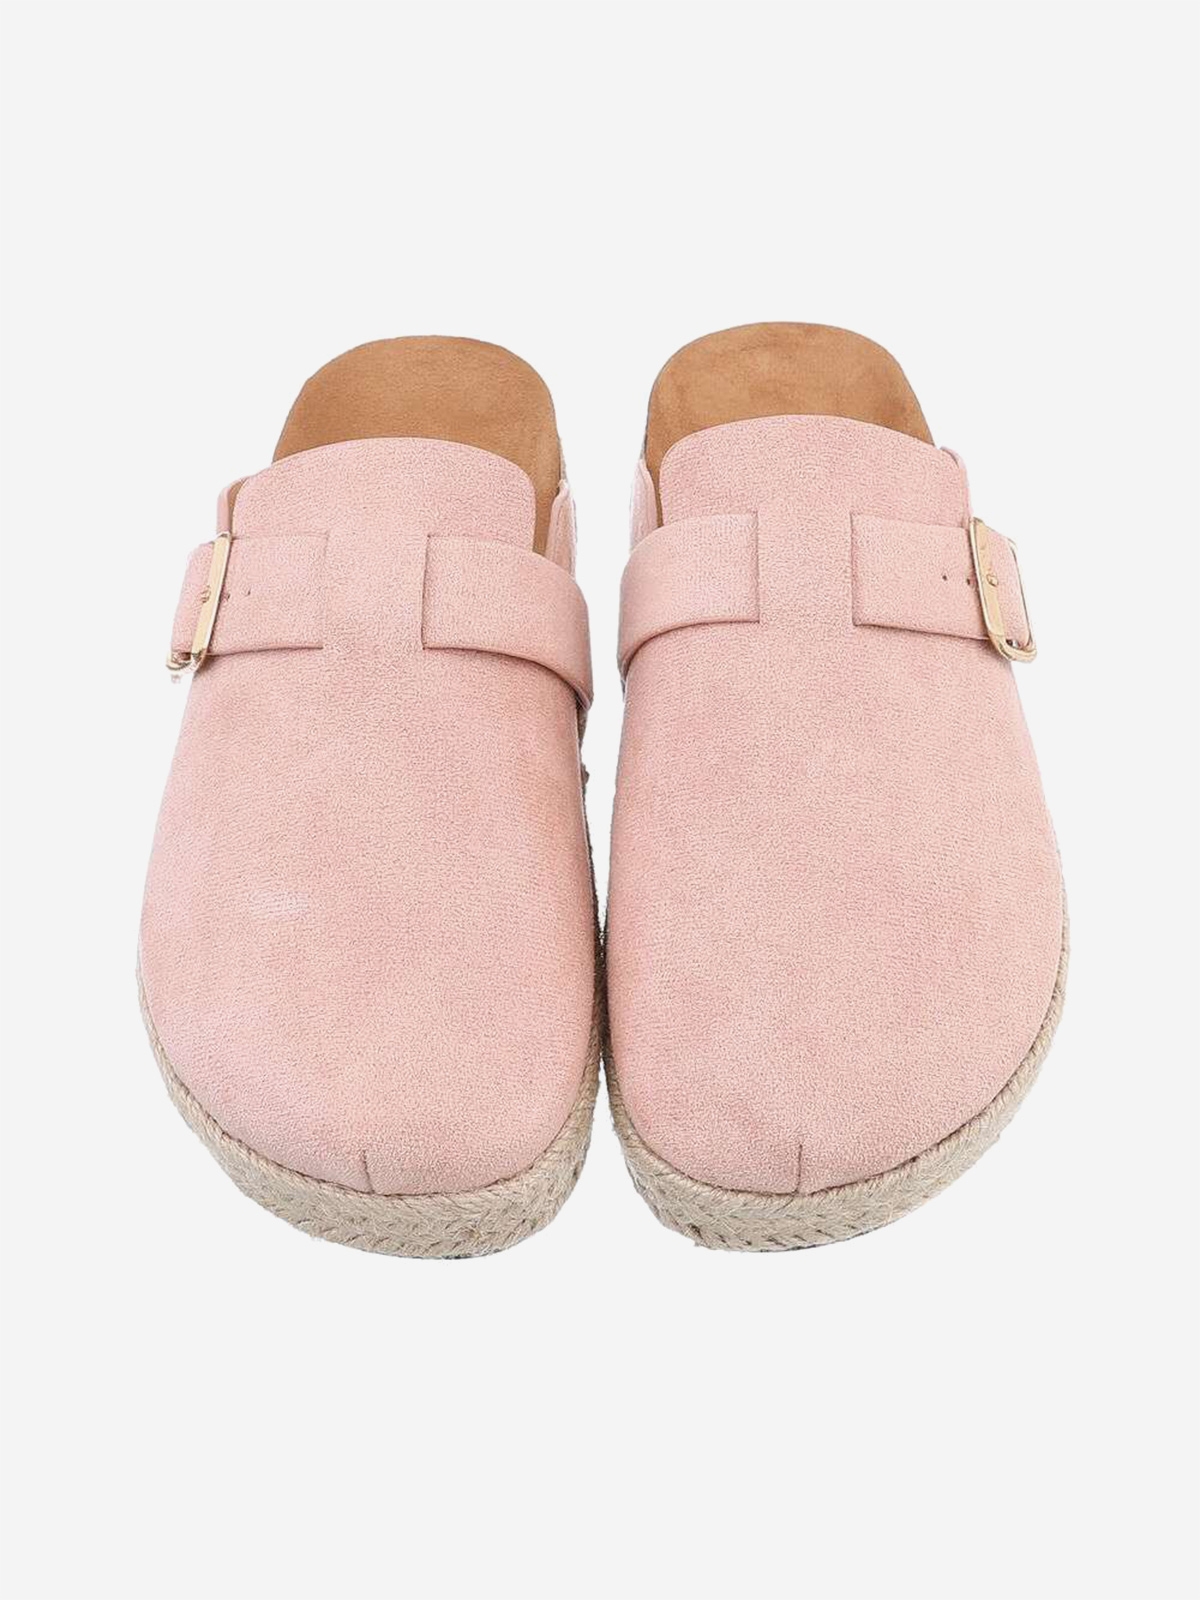 Women's slippers with a thick sole in pink